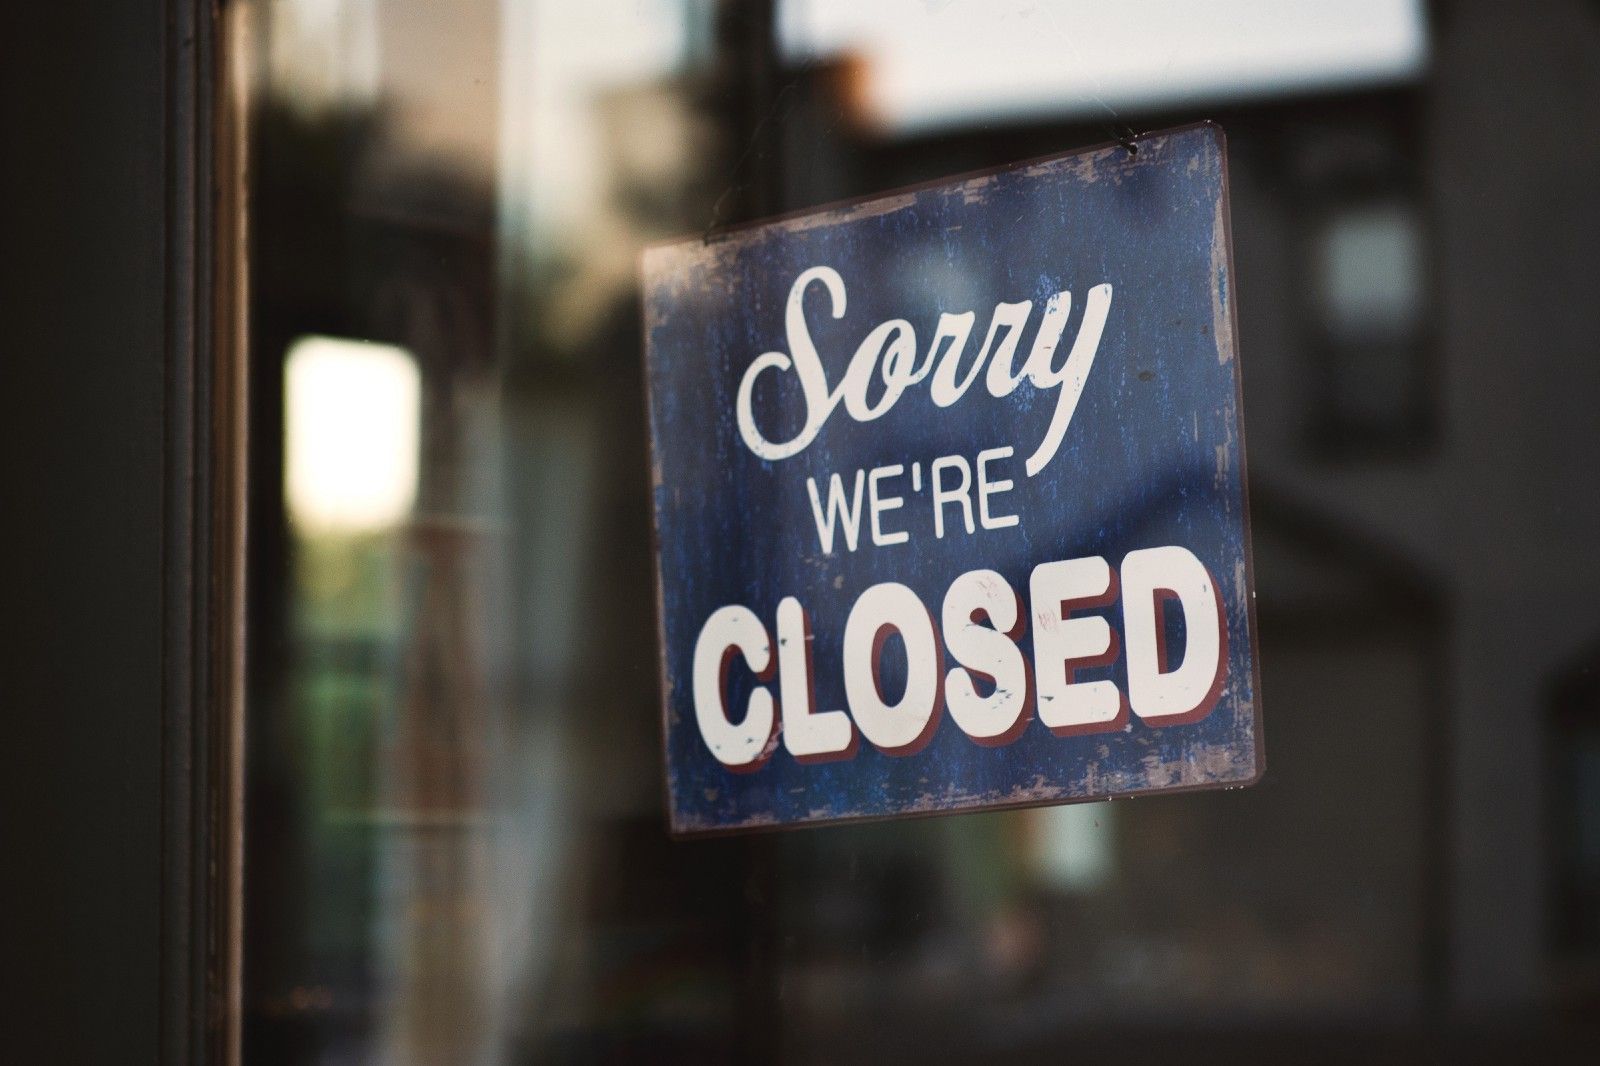 close up of a sign that says "Sorry we're closed" hanging in a window